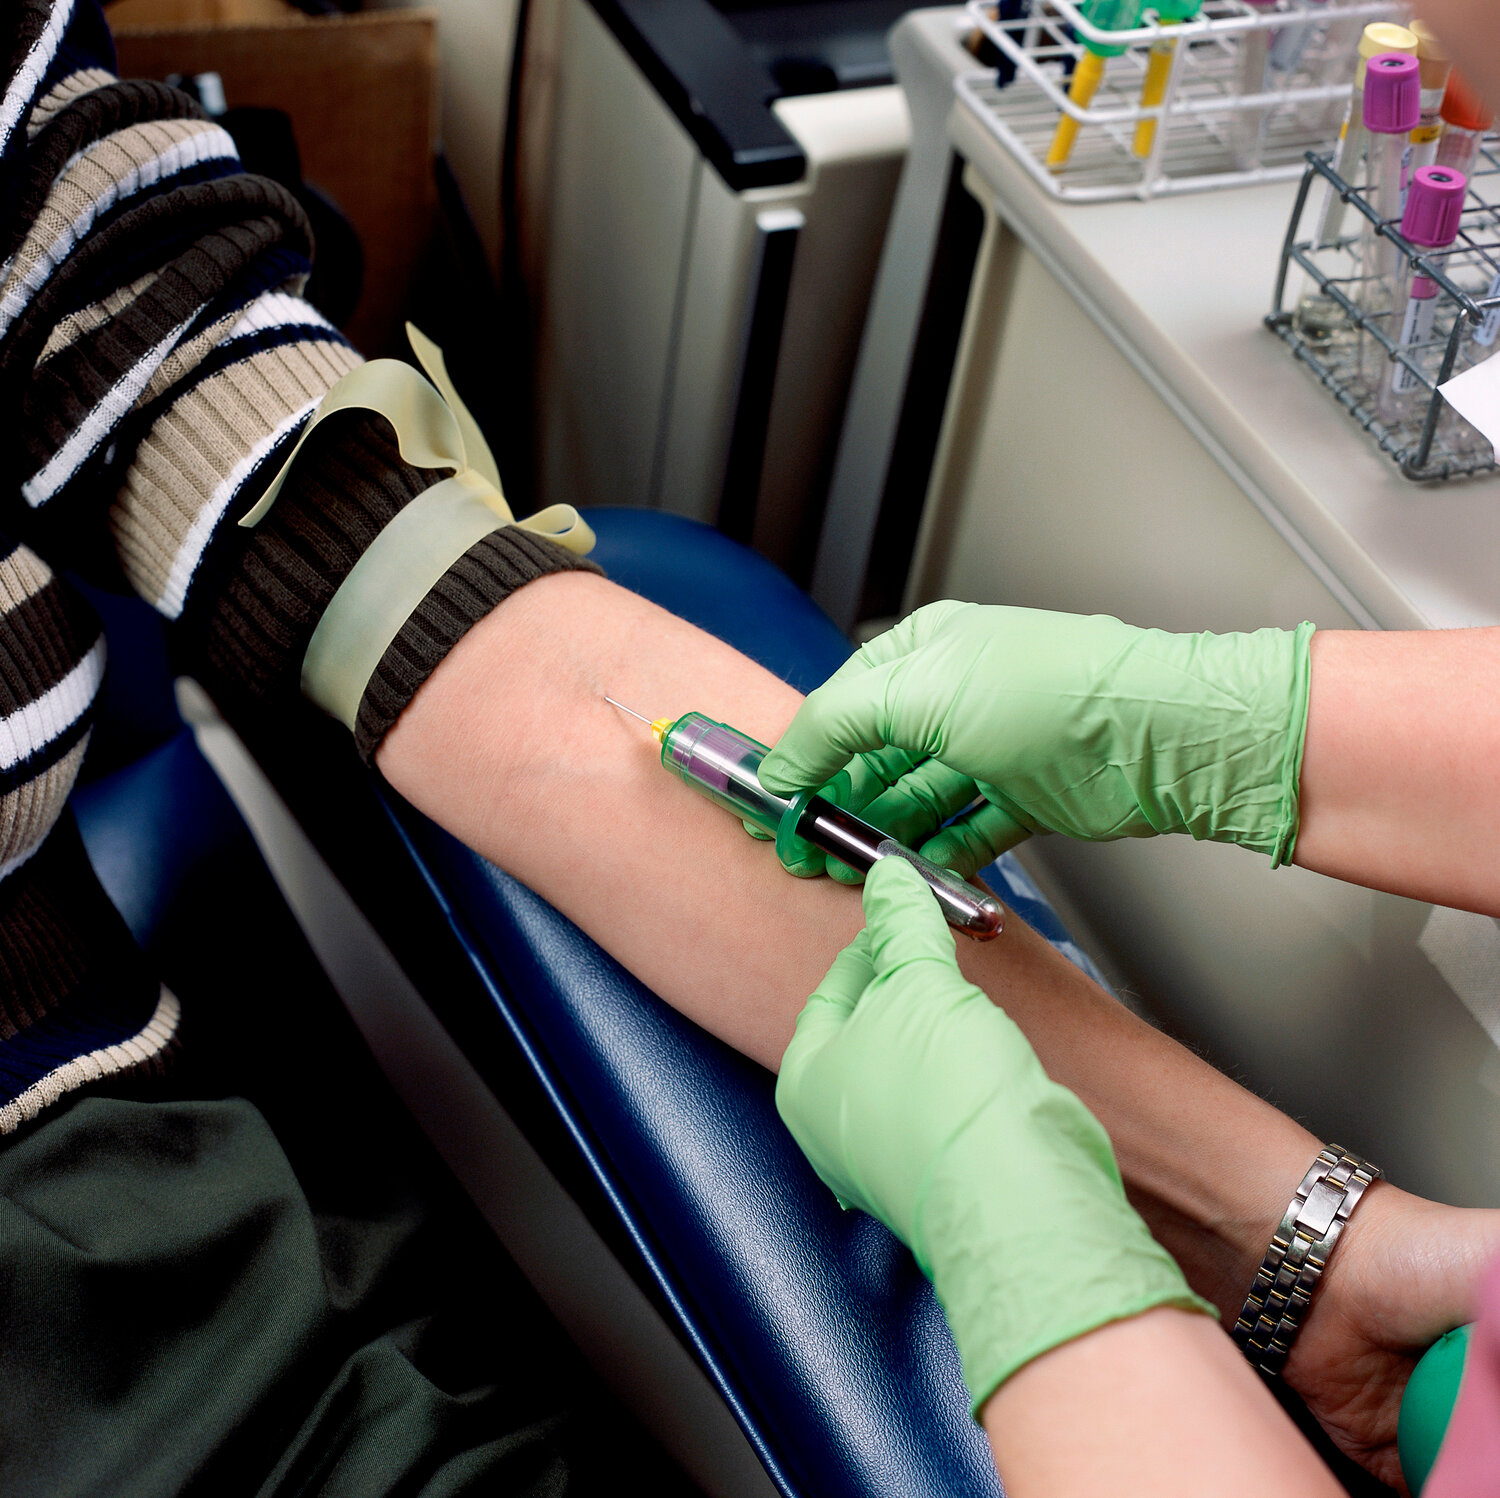 Appointments are available at an 8 a.m.-2 p.m. Thursday, Dec. 14, blood donation drive to be hosted by Civil Air Patrol Falcon Composite Squadron 305.